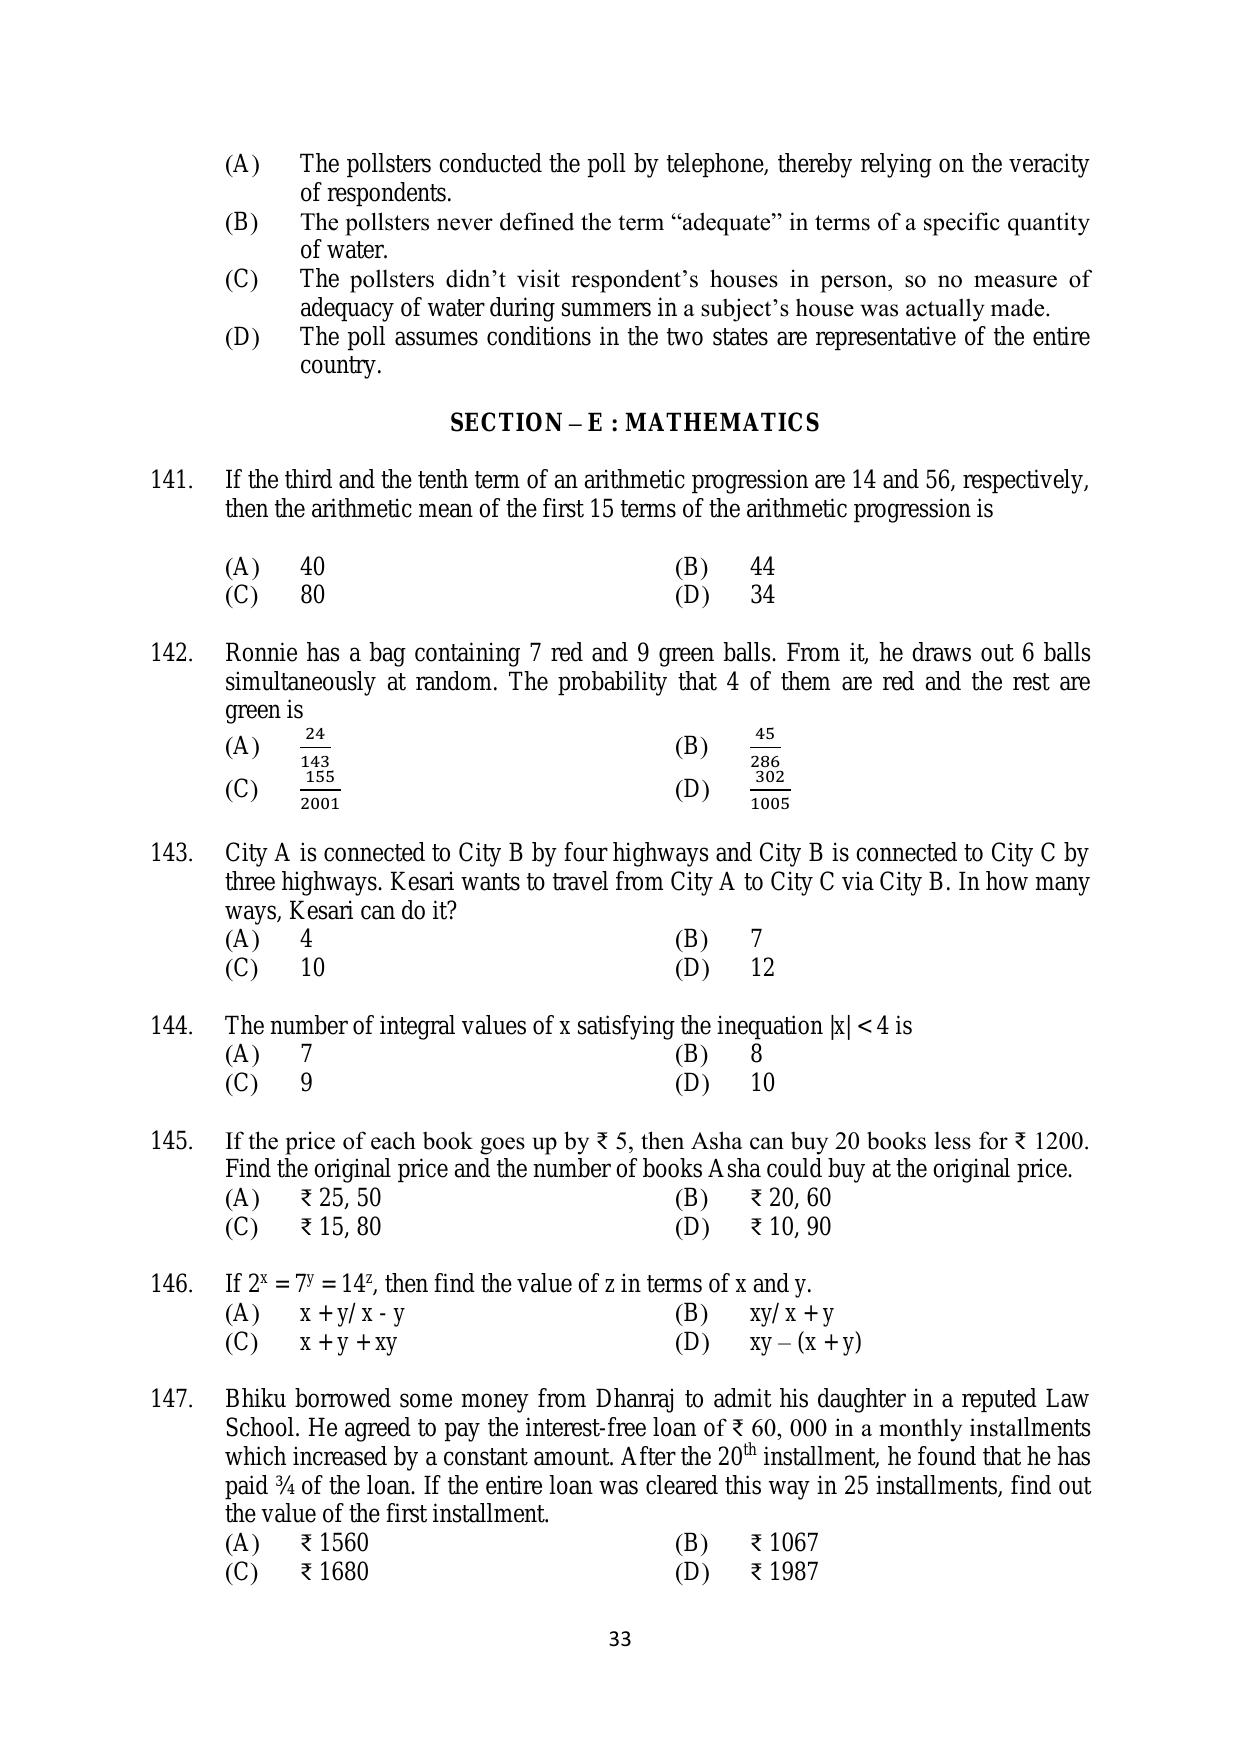 AILET 2020 Question Paper for BA LLB - Page 33